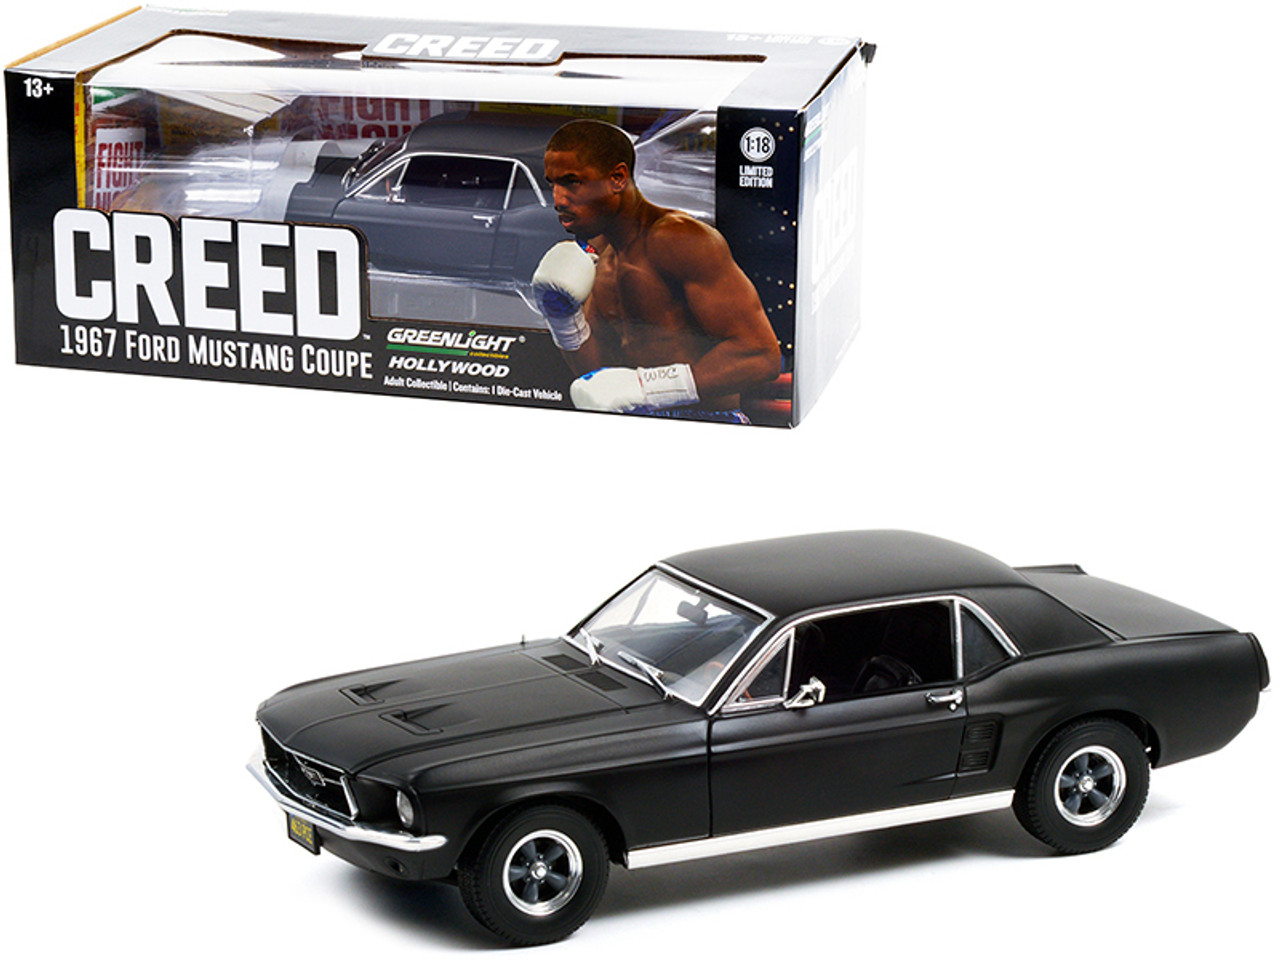 1/18 Greenlight 1967 Ford Mustang Coupe Matt Black (Adonis Creed's) "Creed" (2015) Movie Diecast Car Model